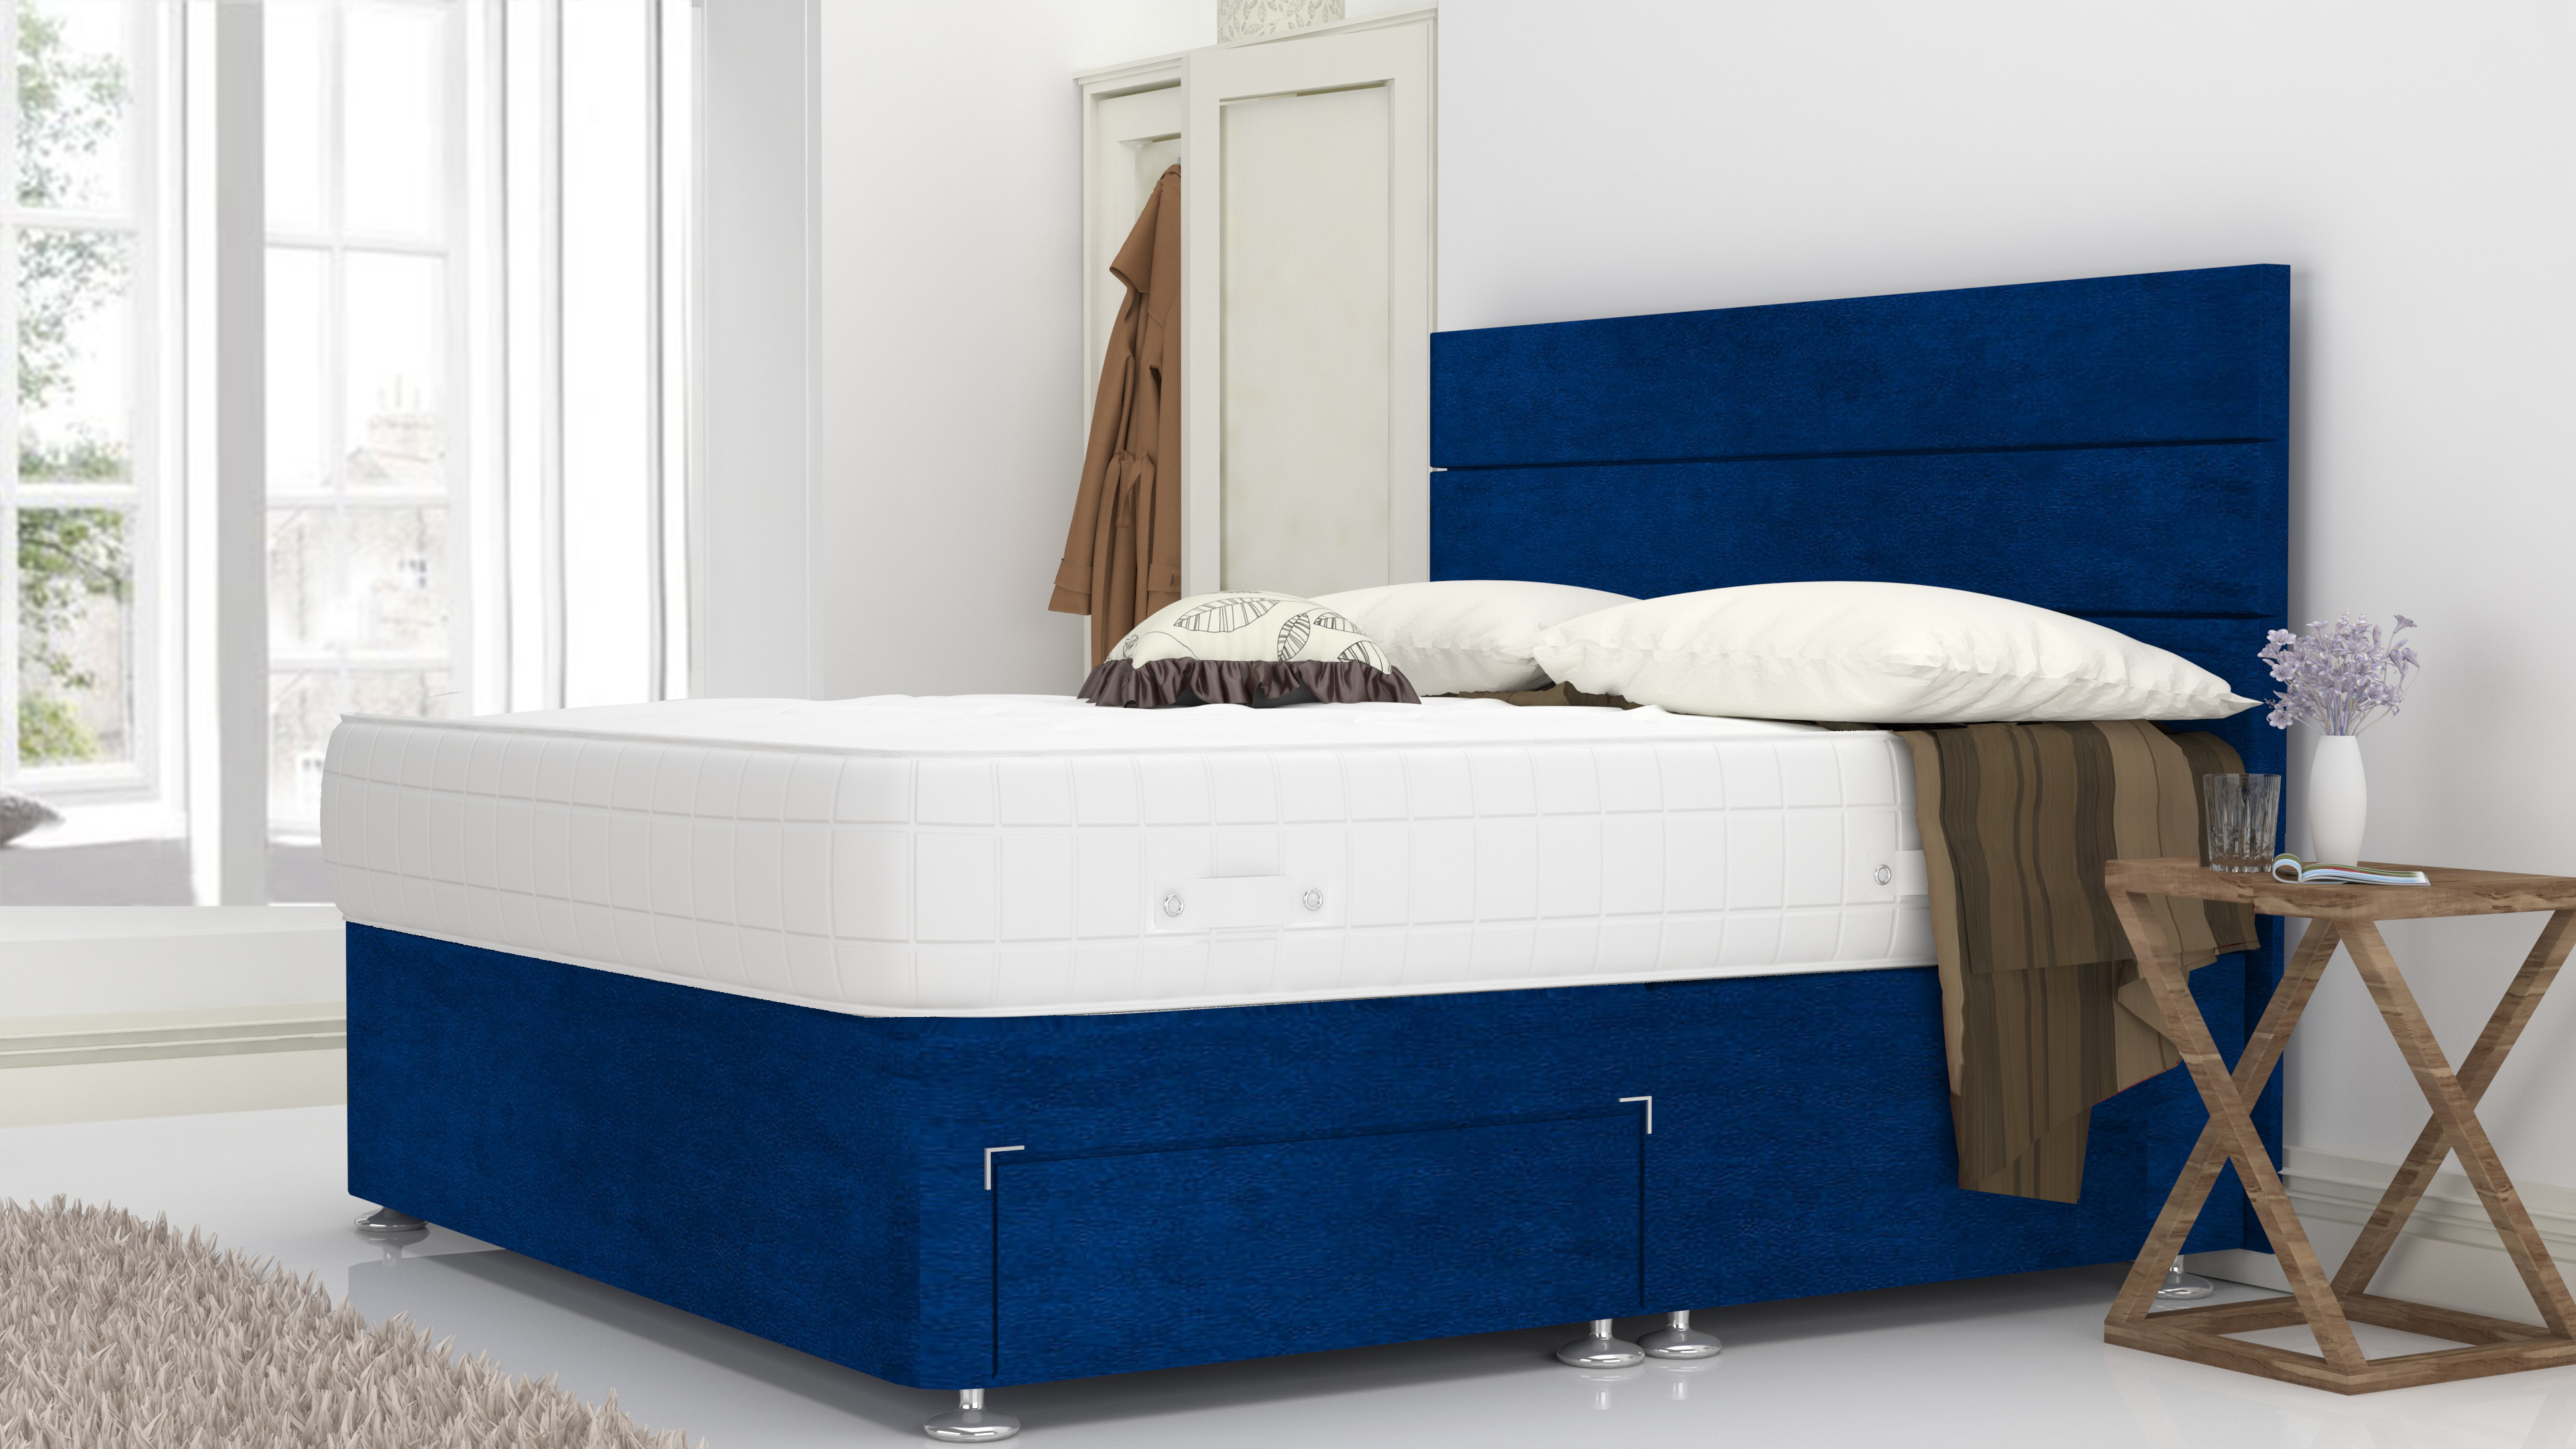 Blue Plush 4FT 6" Divan Bed Set With 3 Panel Headboard (Included Feet) And Free Pillow Top Mattress